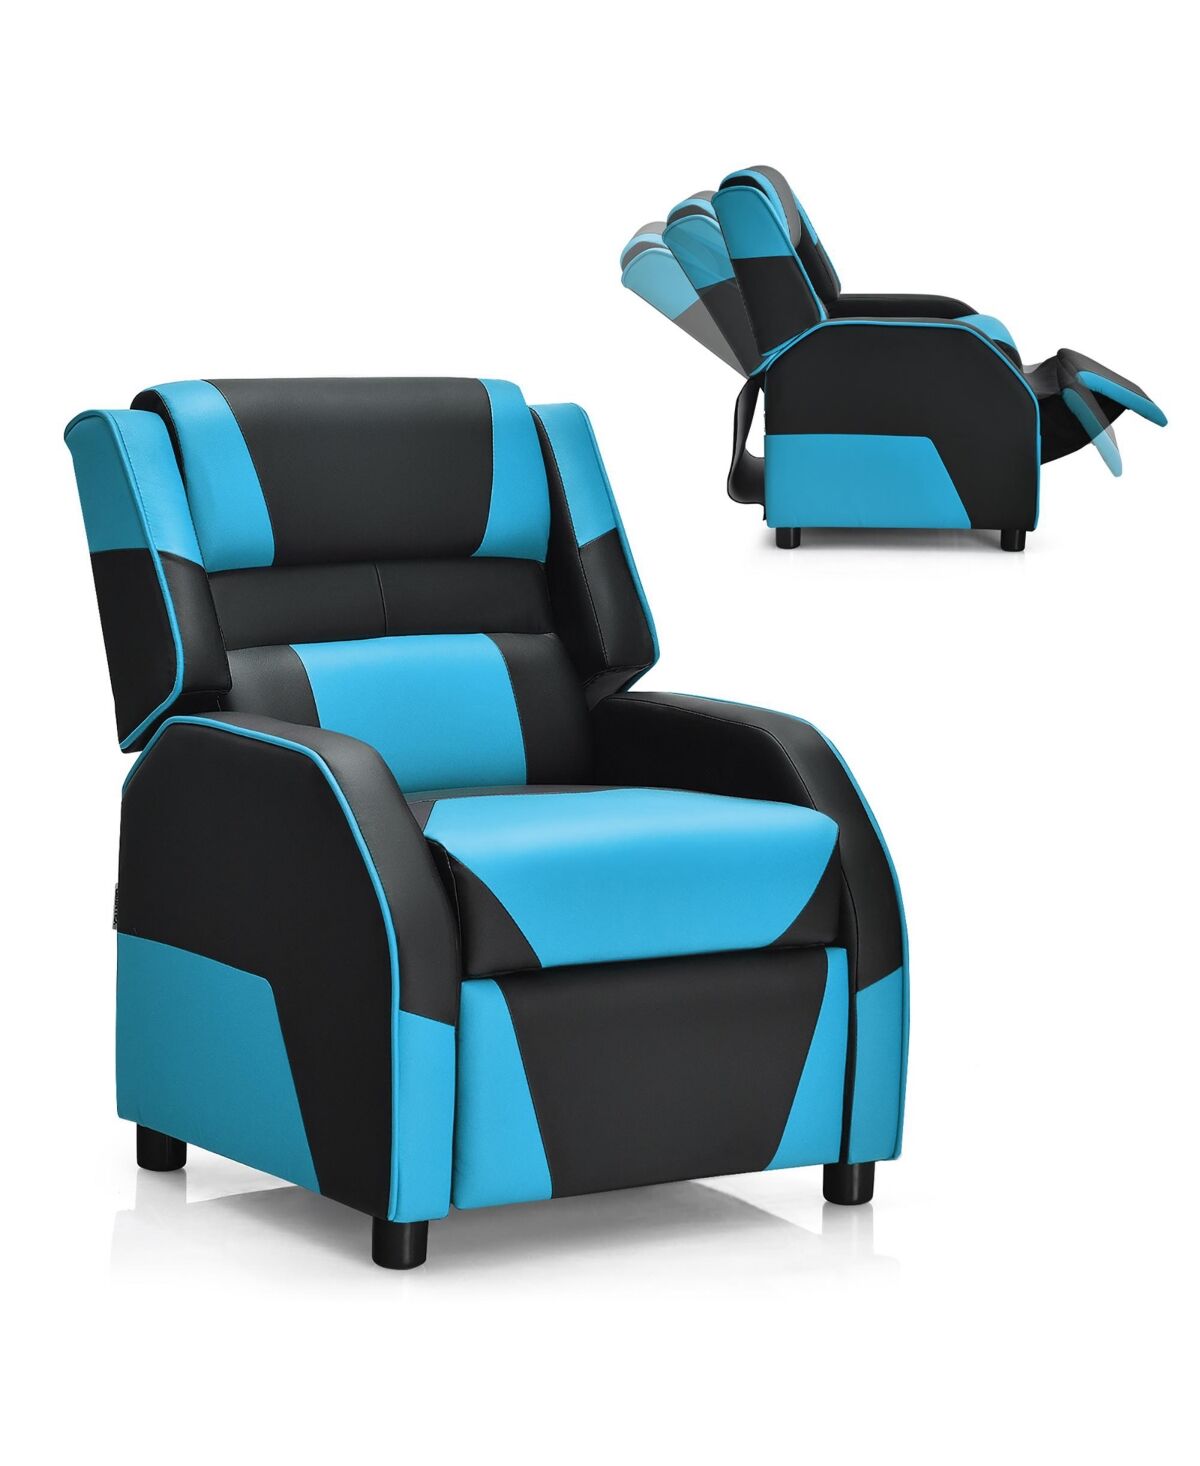 Costway Kids Youth Gaming Sofa Recliner w/Headrest & Footrest - Blue